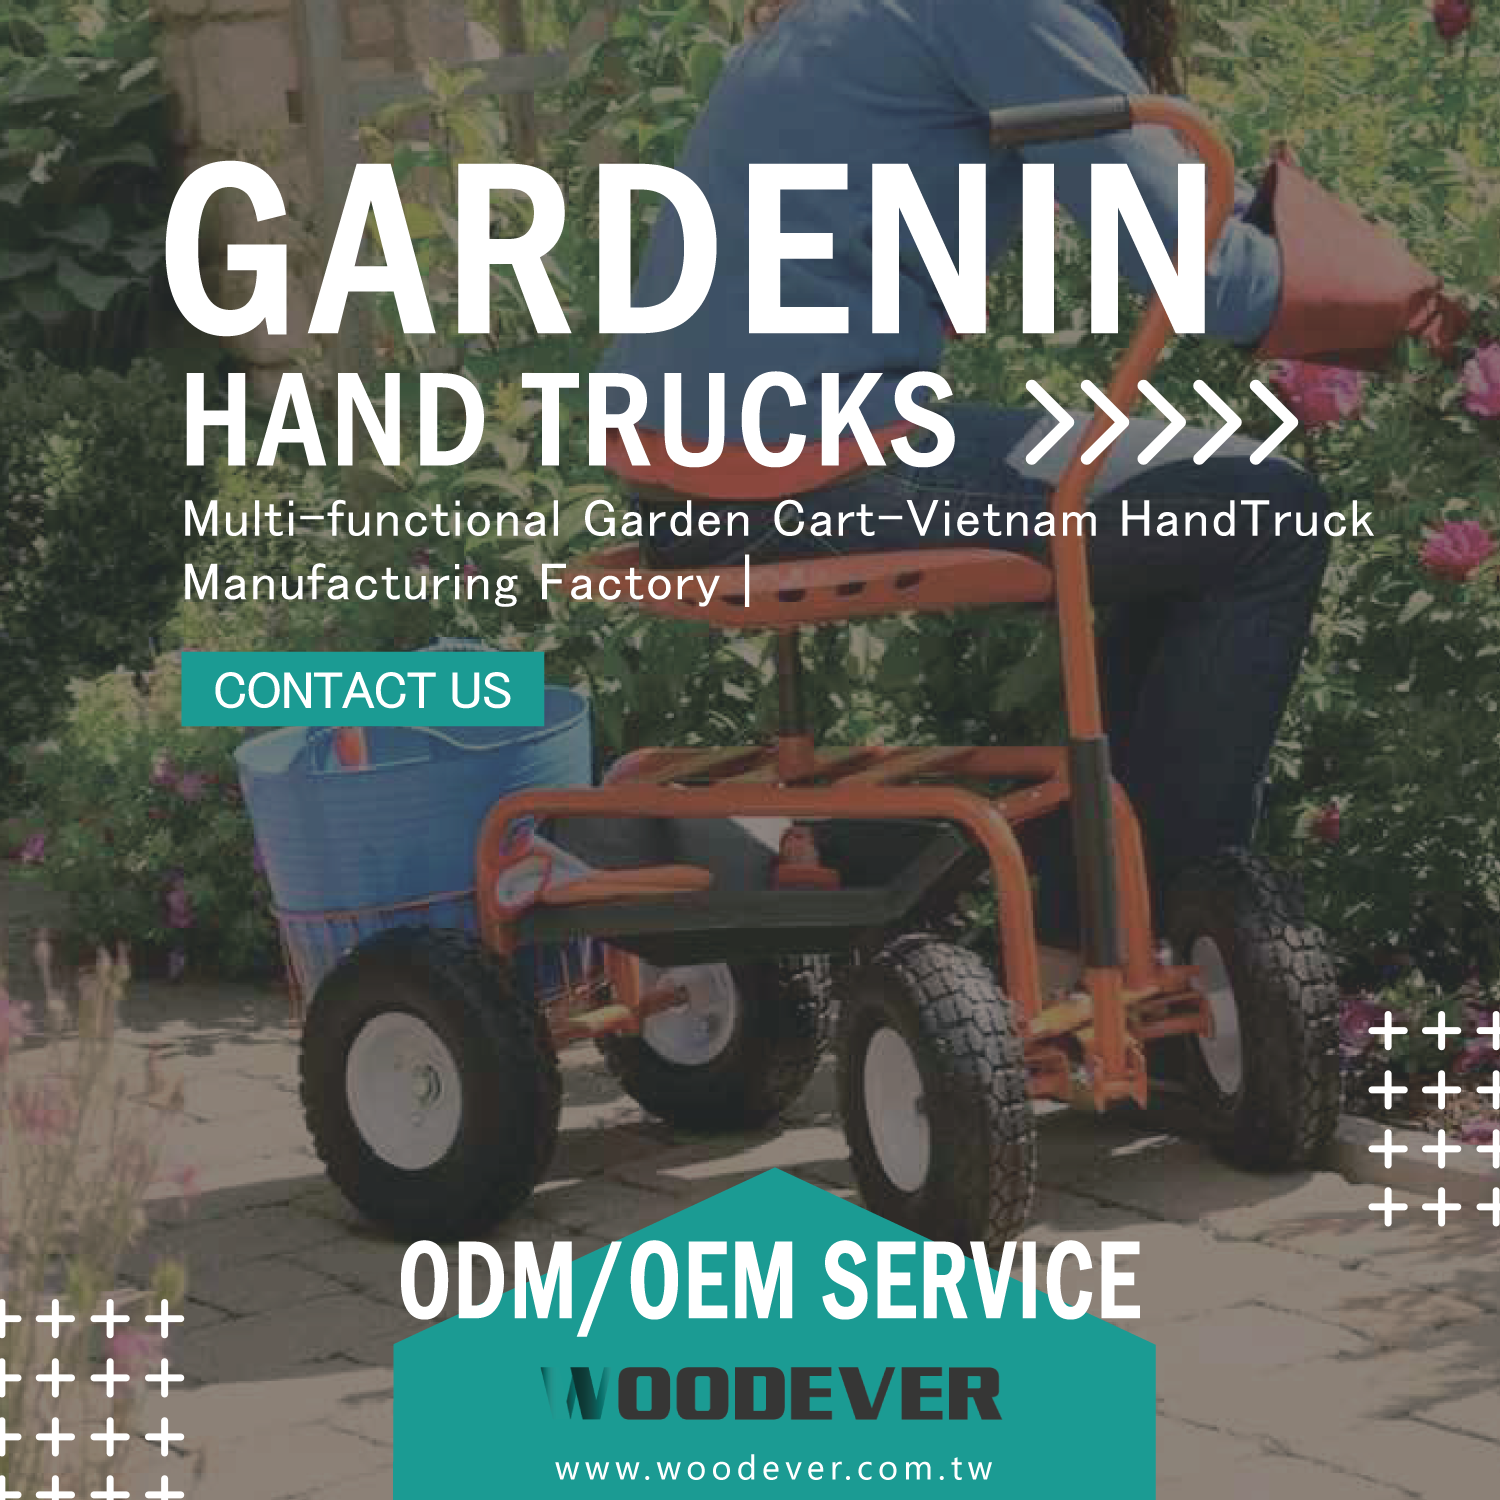 WOODEVER Vietnam Trolley Handtruck Manufacturing & Wholesale Factory provides brand new garden cart styles, highly flexible customized OEM & ODM global one-stop B2B service, providing the best handtruck solutions for global customers.